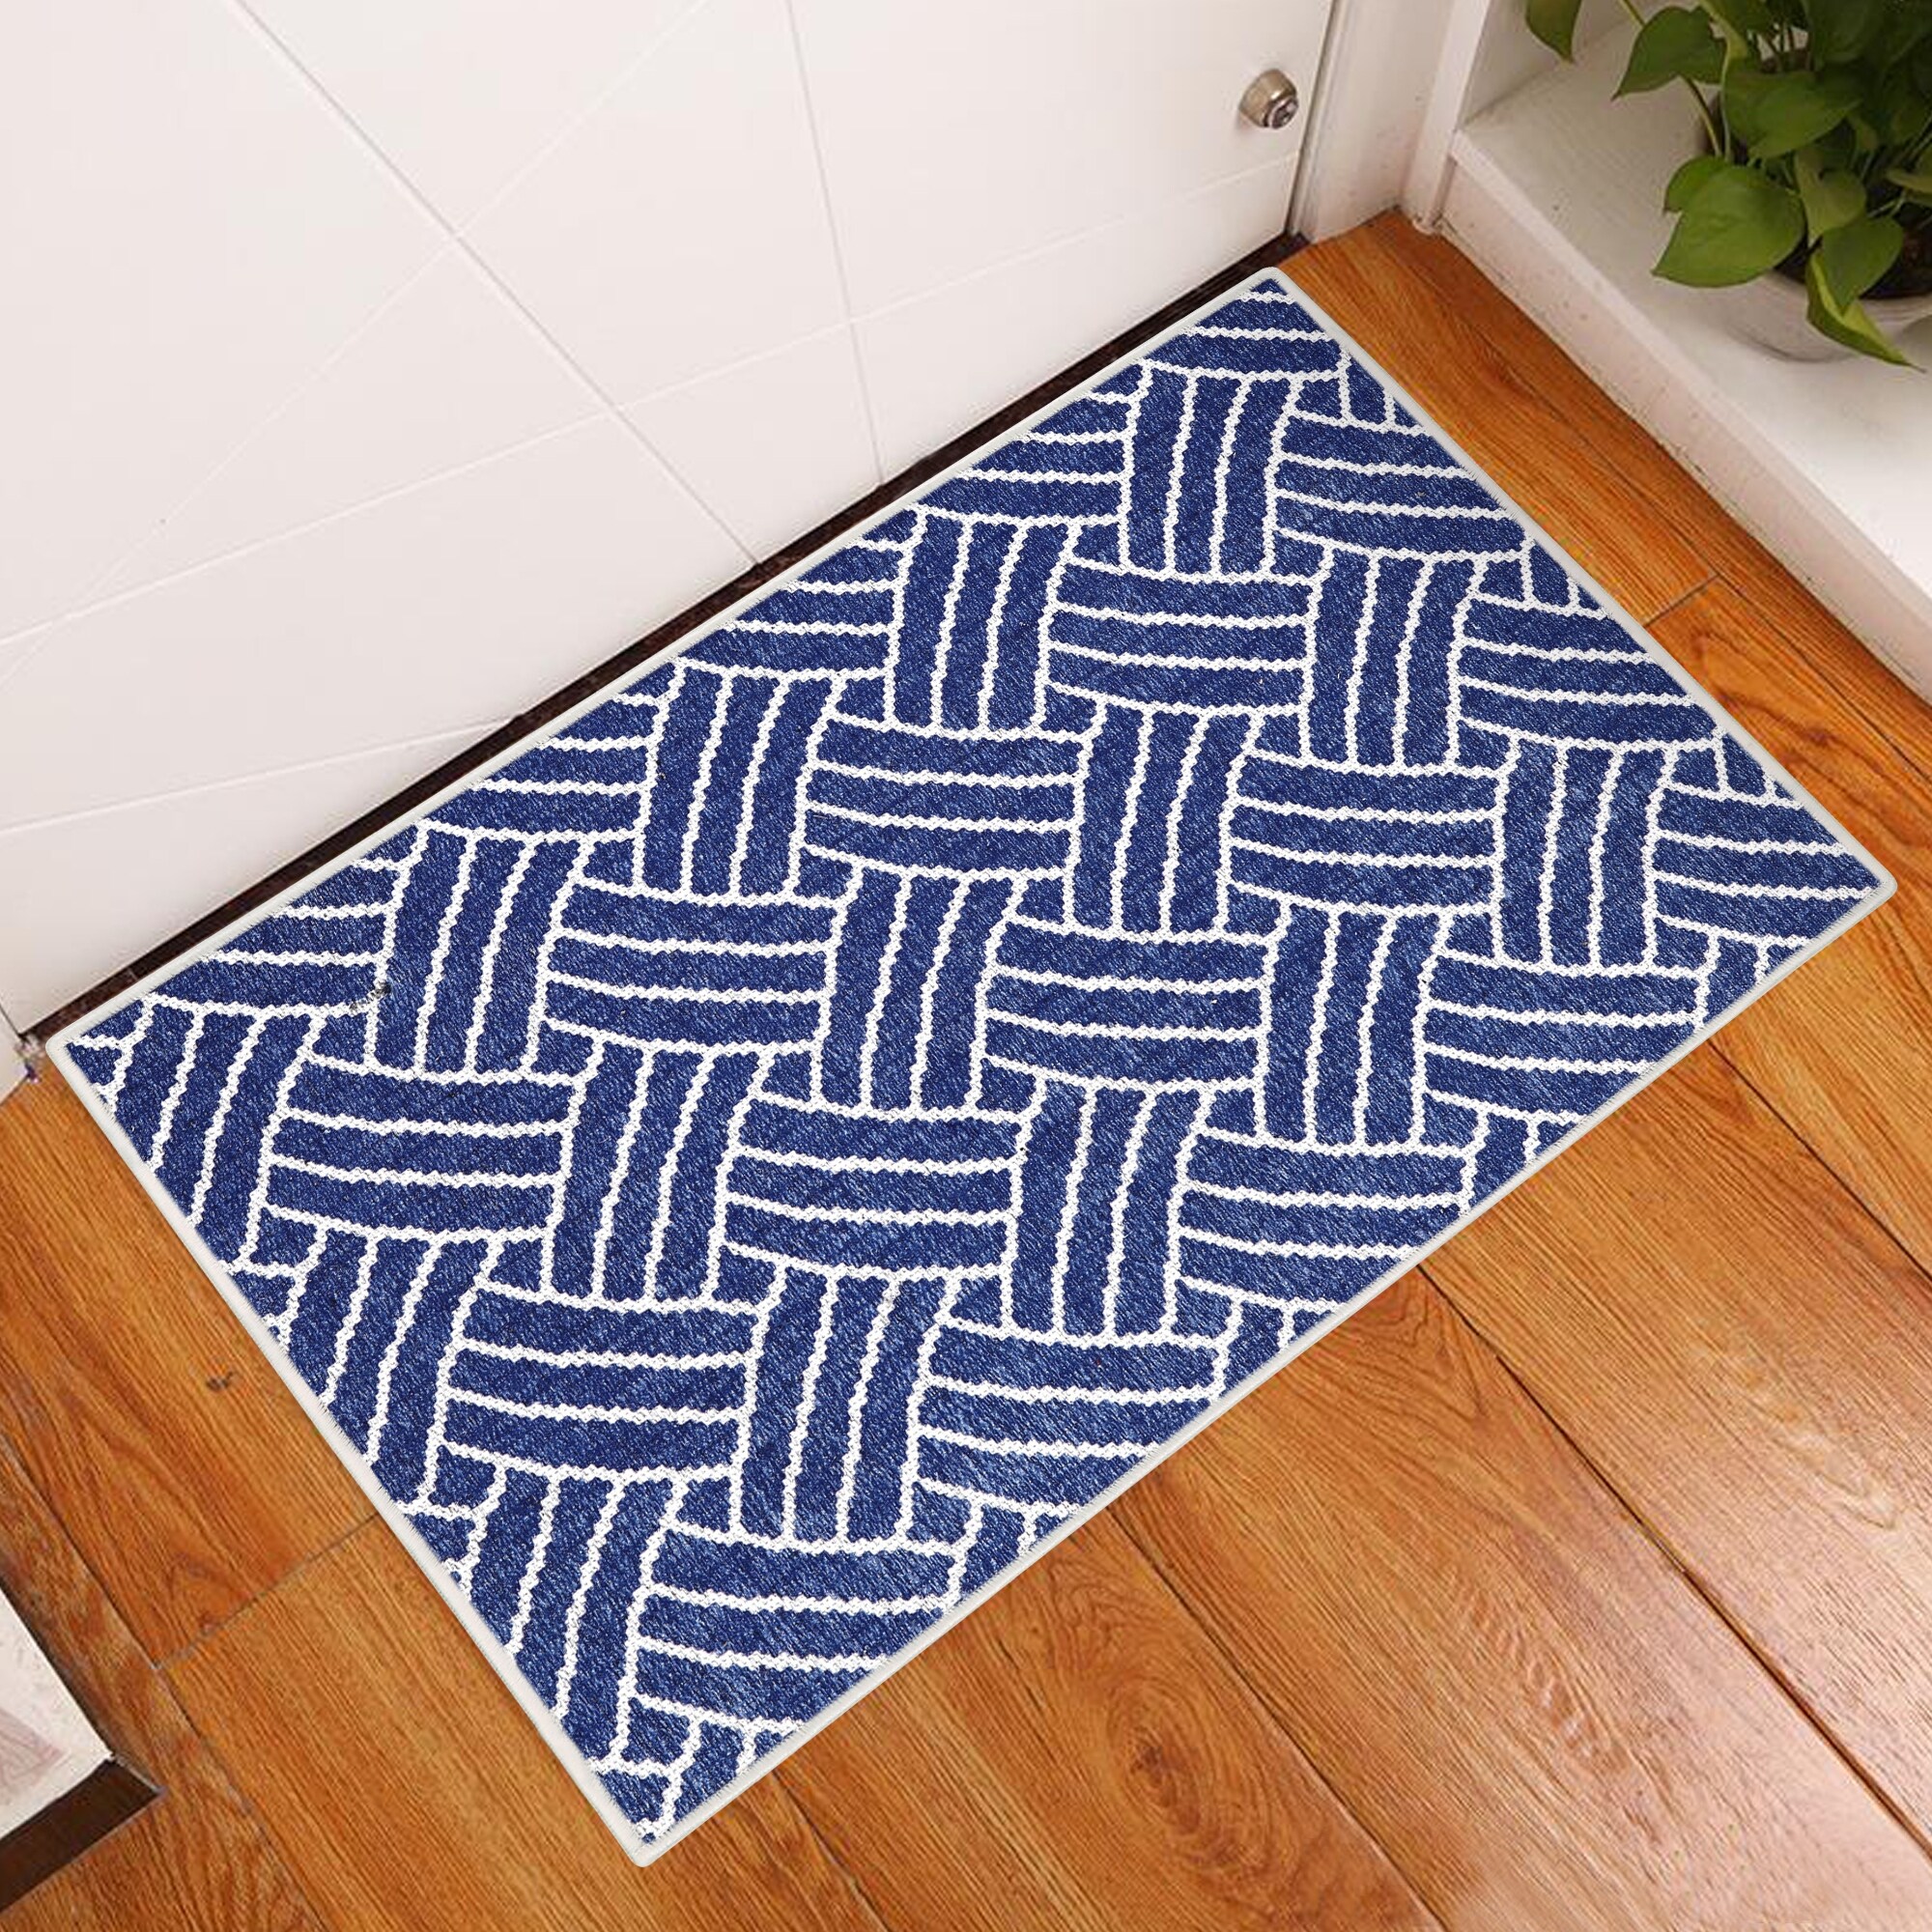 https://ak1.ostkcdn.com/images/products/is/images/direct/431fafa75107475cc2d6ff2b5290b7ae36e9144c/Sisal-Collection-2-x-3-Foot-Rug-Runner-Thin-Non-Slip-Area-Rug---Cotton-Indoor-Rug-for-Front-Door-Foyer-Rug-for-Entryway.jpg